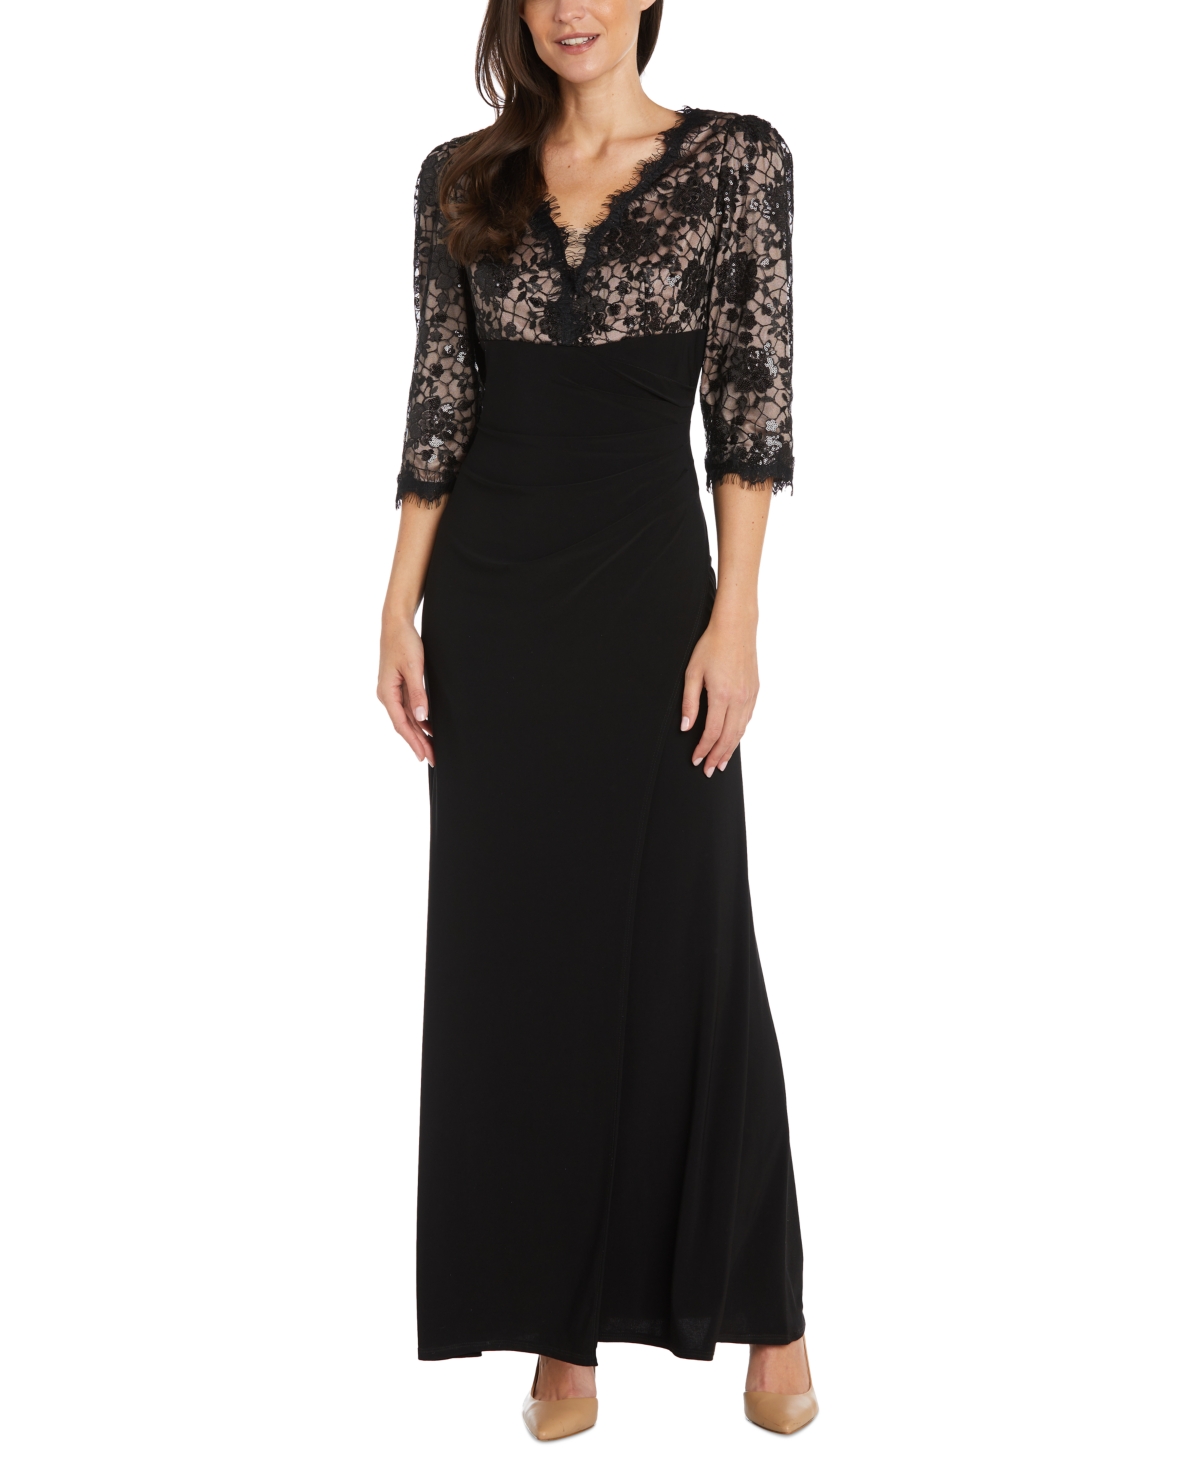 Petite Lace 3/4-Sleeve Gown - Black/Nude